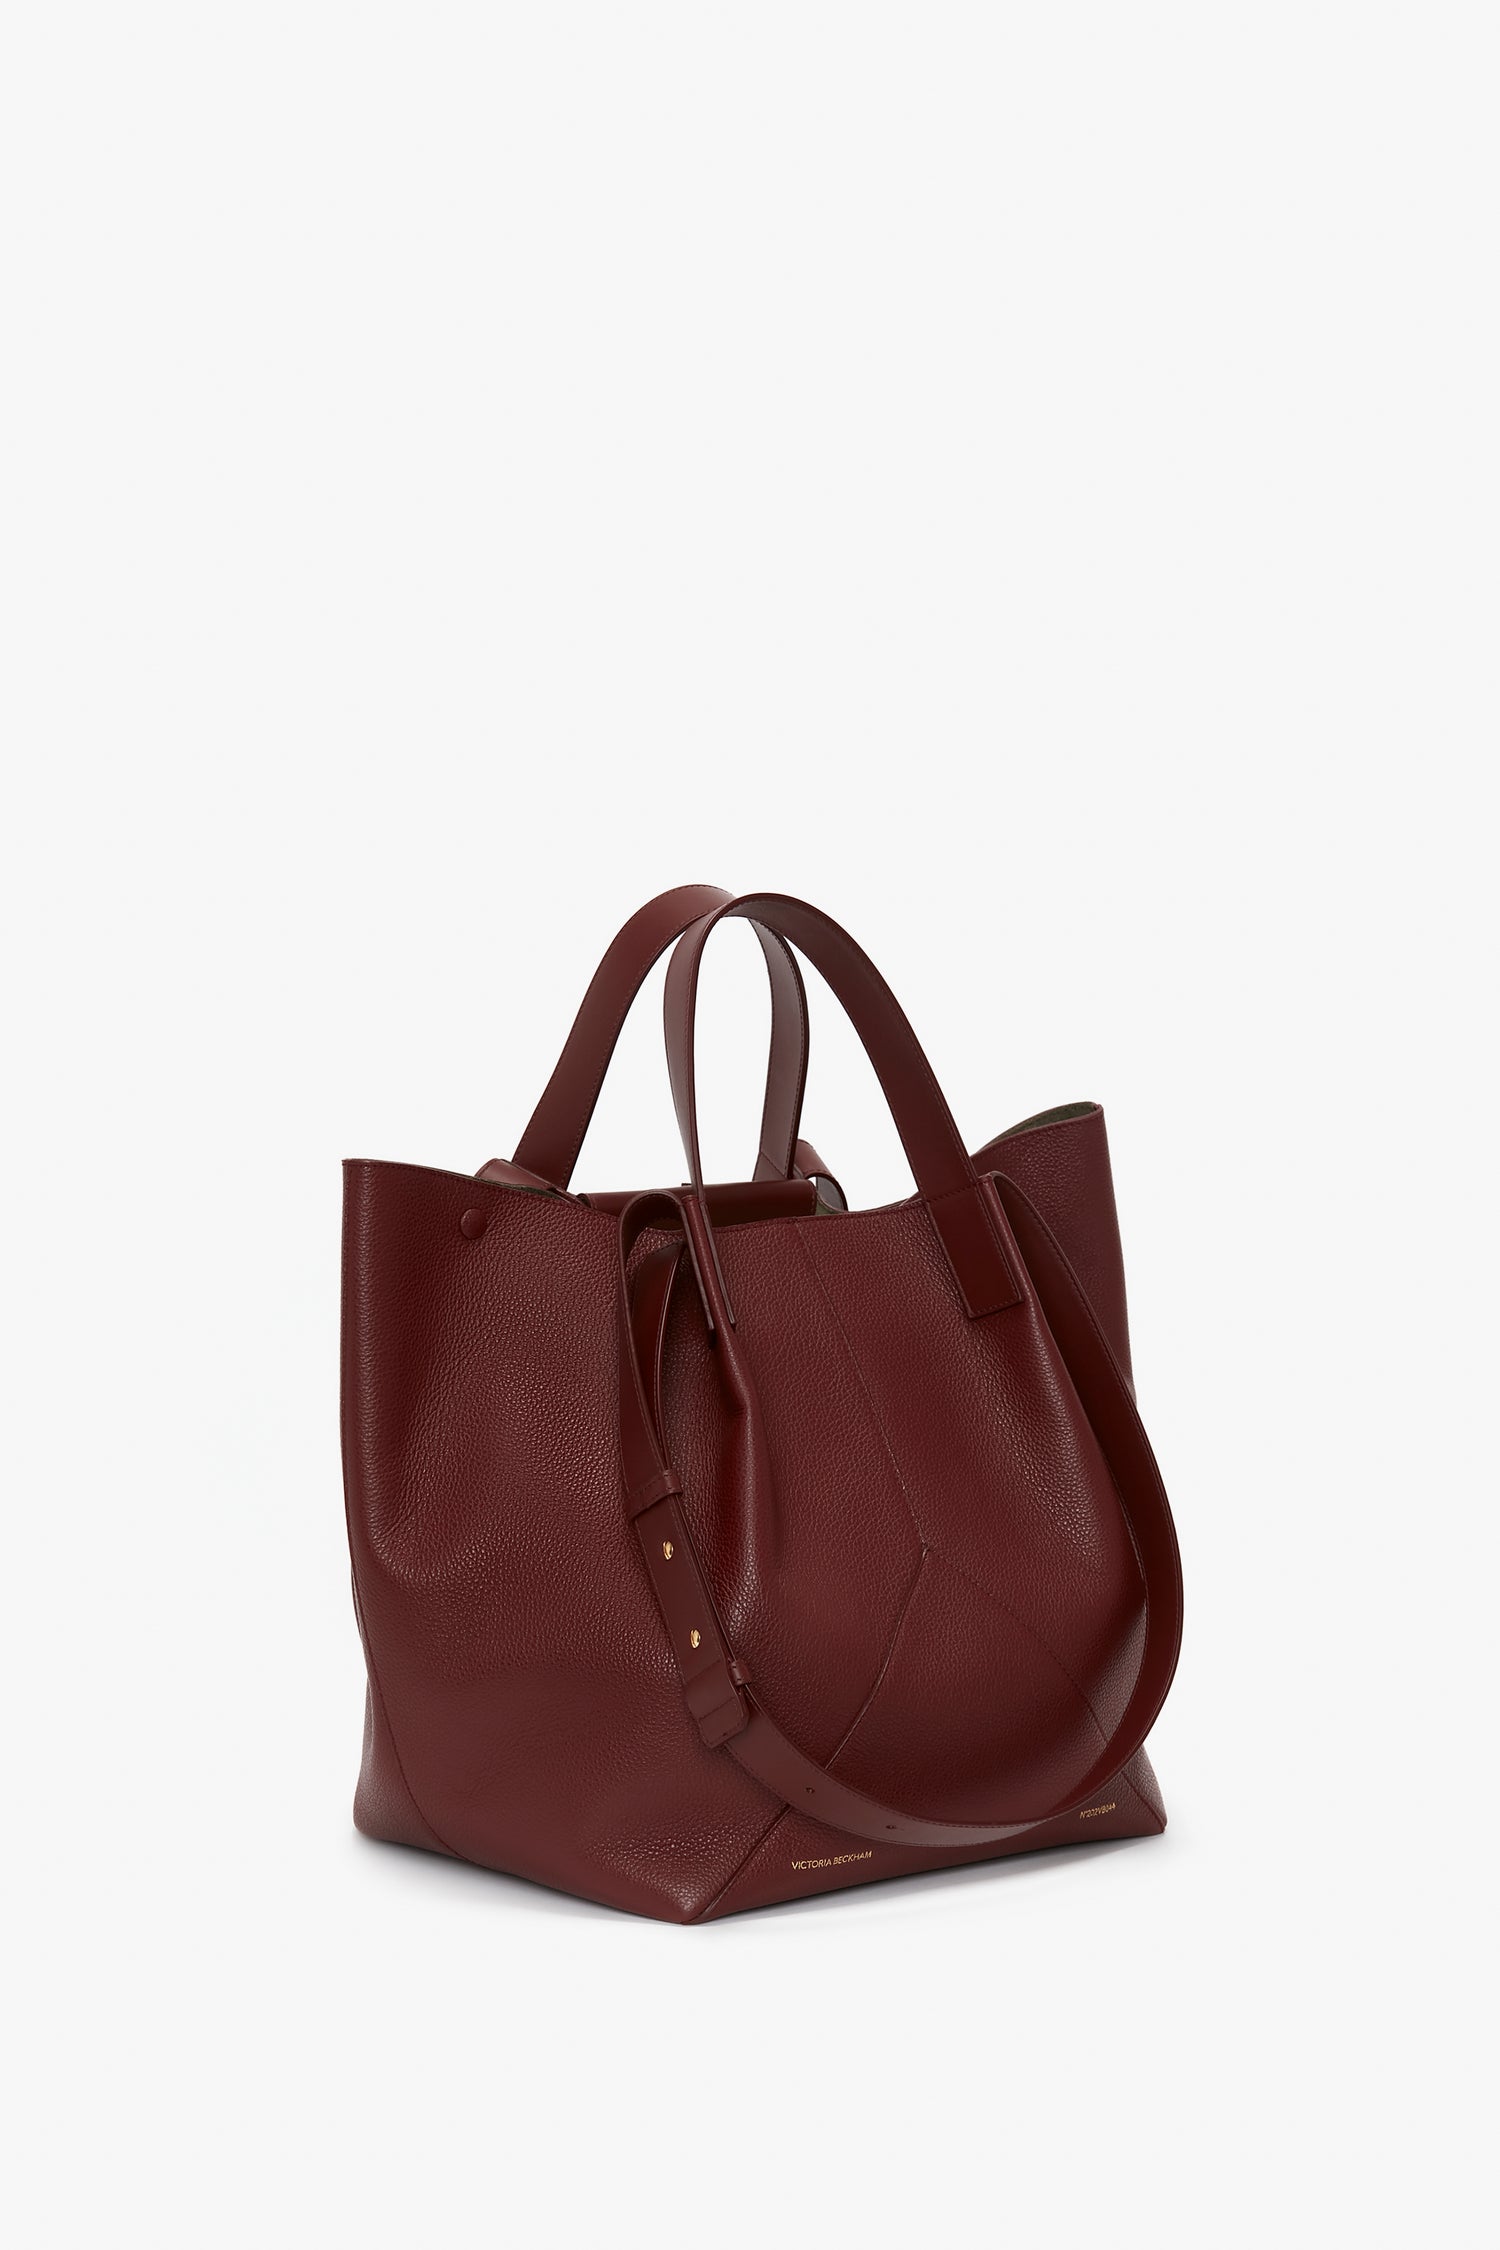 A Victoria Beckham Medium Tote In Burgundy Leather with two handles, standing upright against a plain white background.